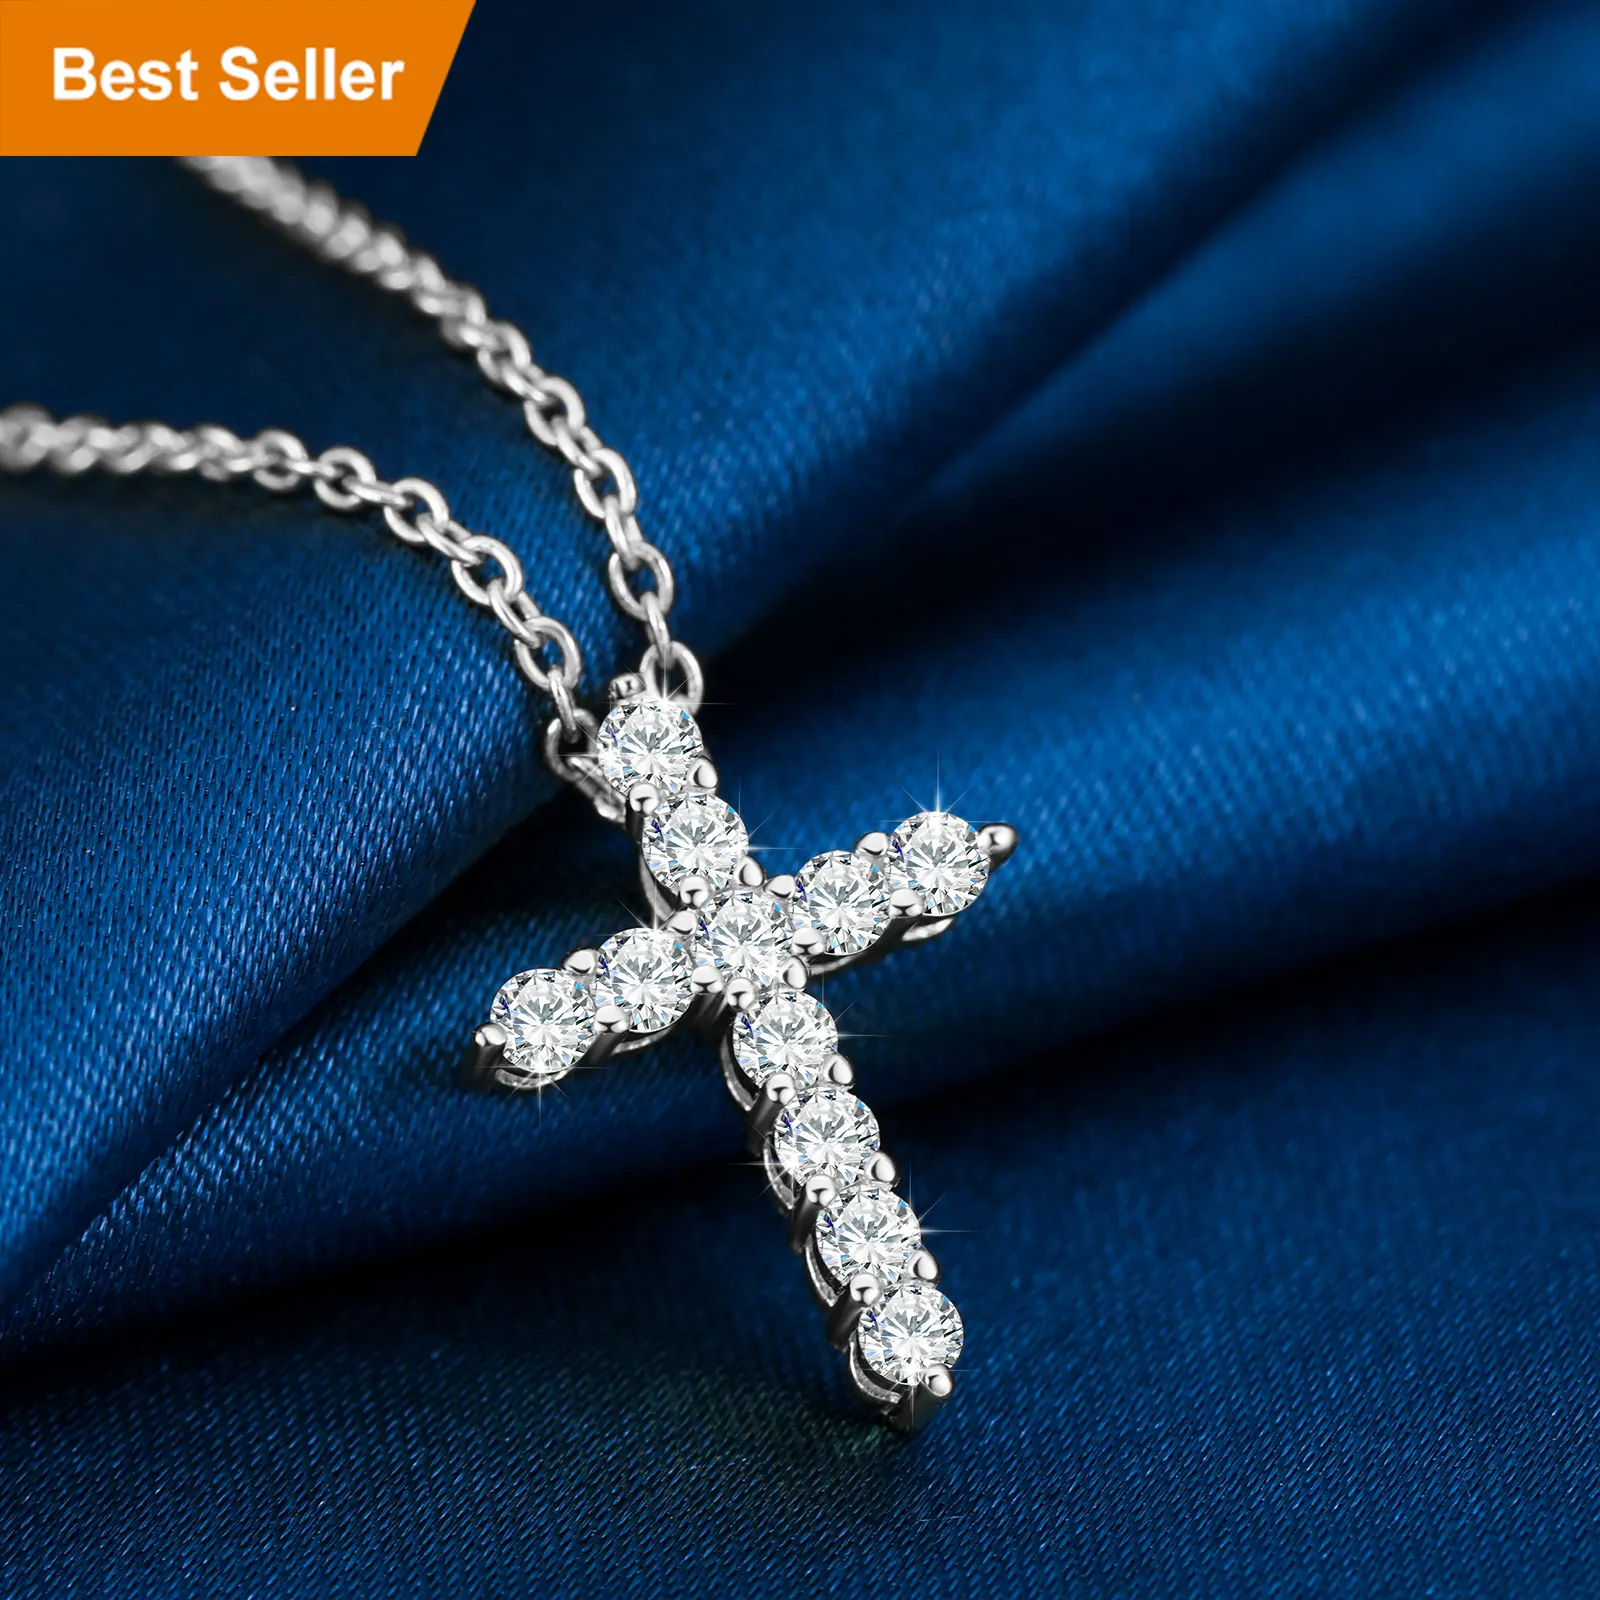 Waterproof Moissanite Cross Necklace Colliers Dropshipping 1.1ct VVS Diamond 925 Sterling Silver Jewelry Pendant For Men Women